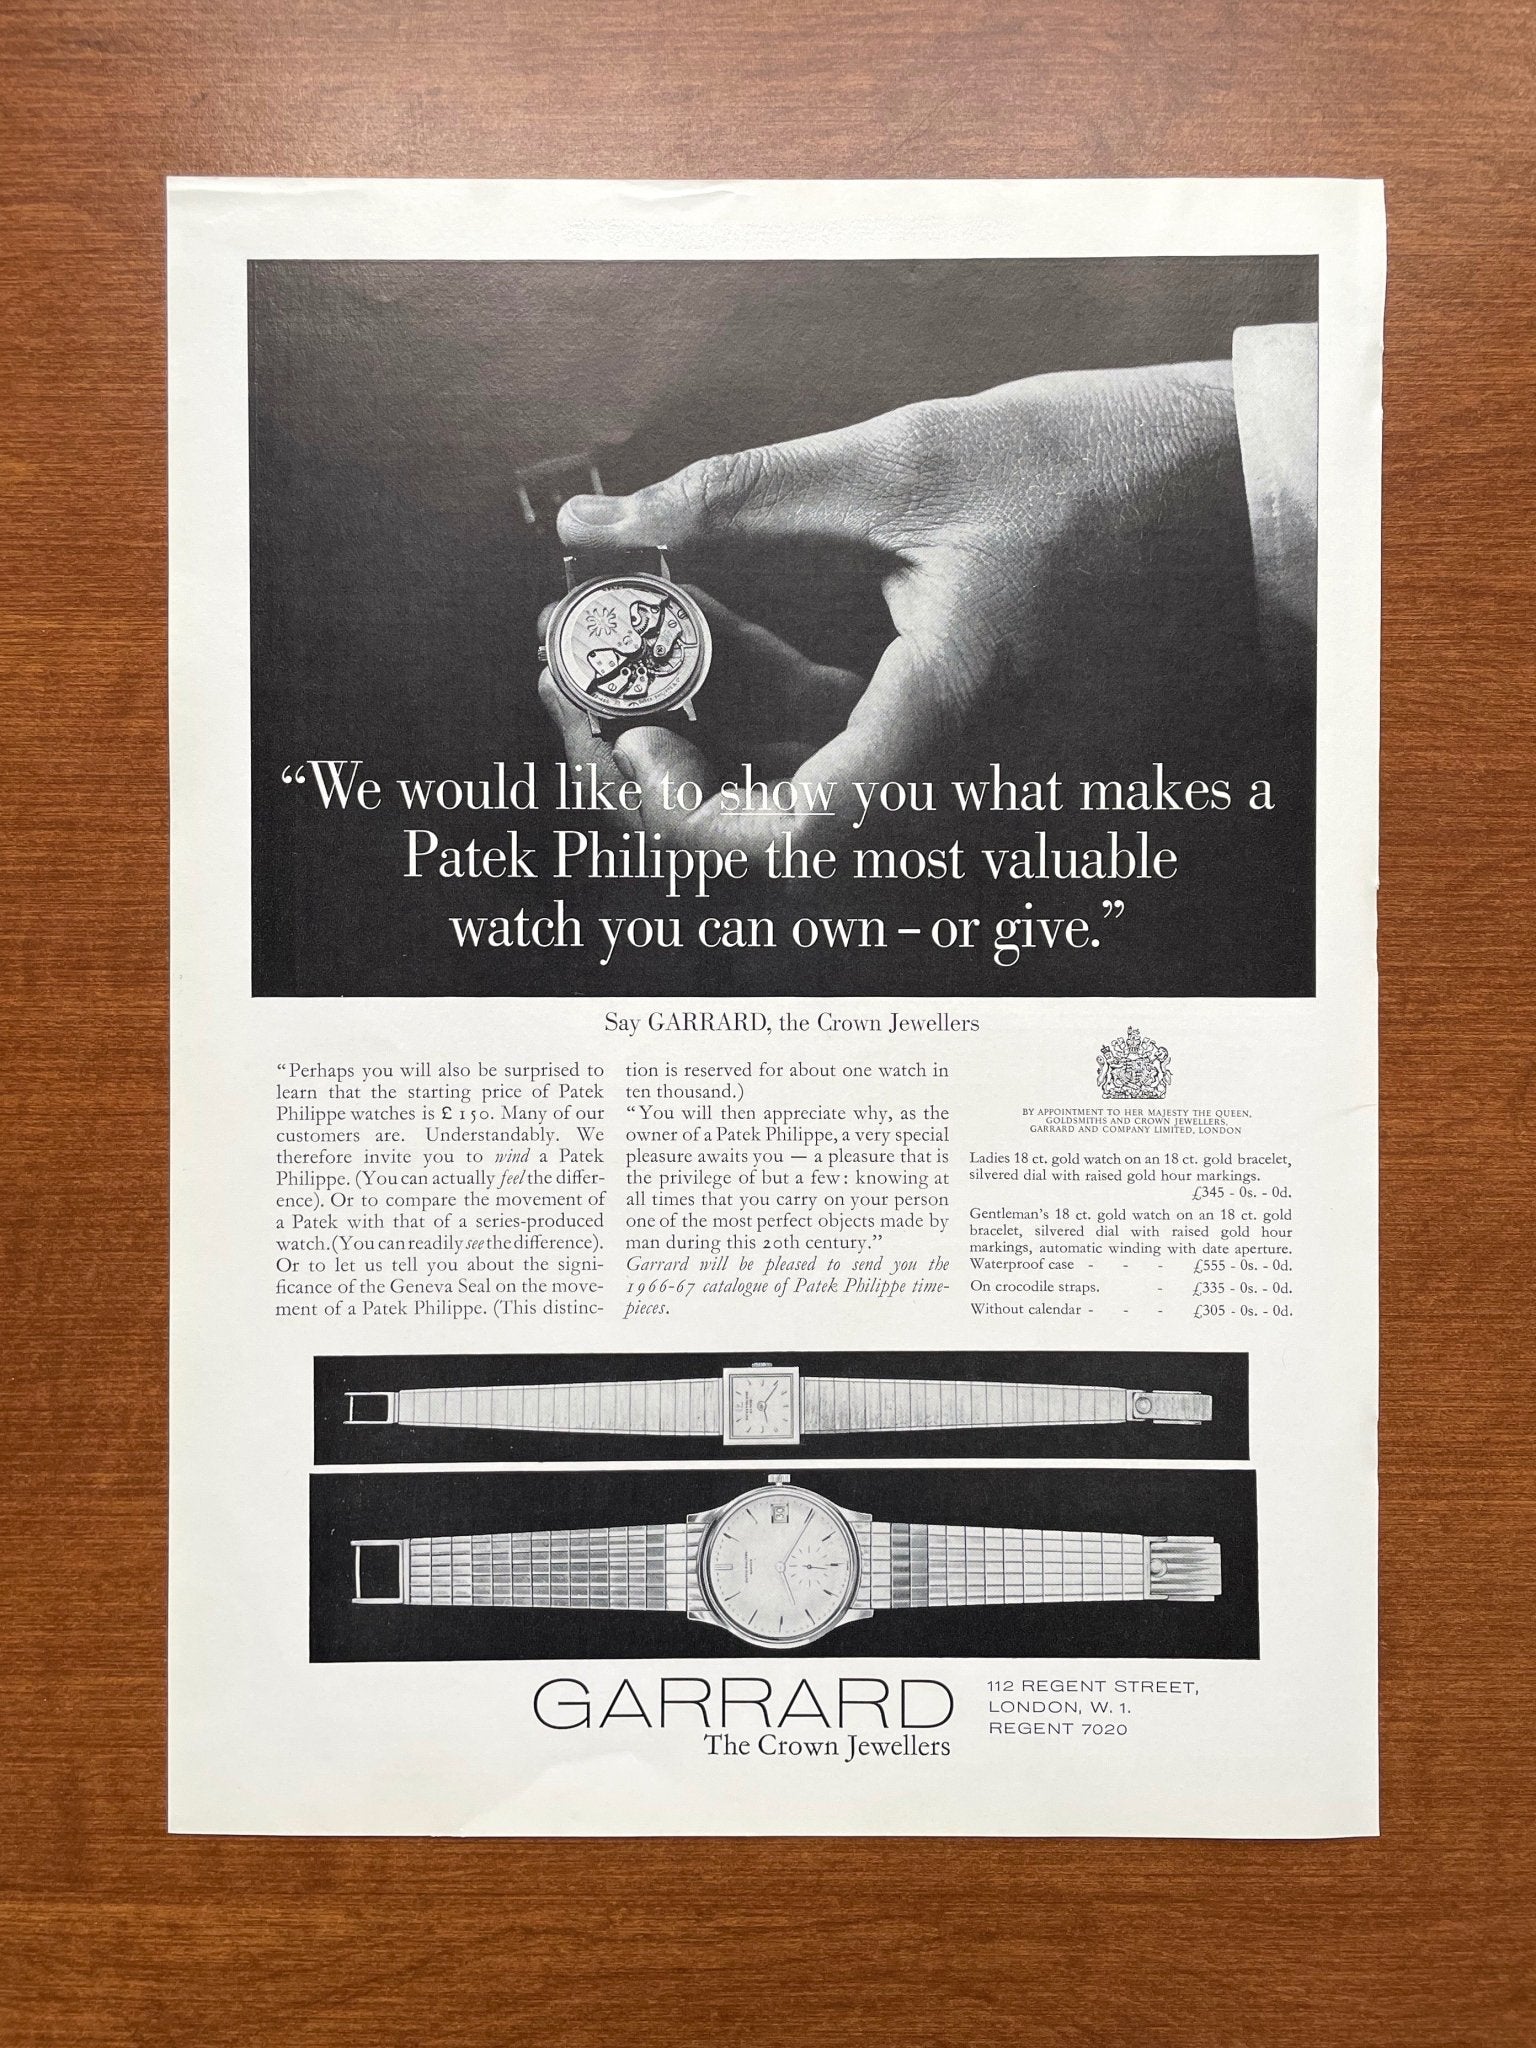 1966 "What Makes a Patek Philippe the most valuable..." Advertisement